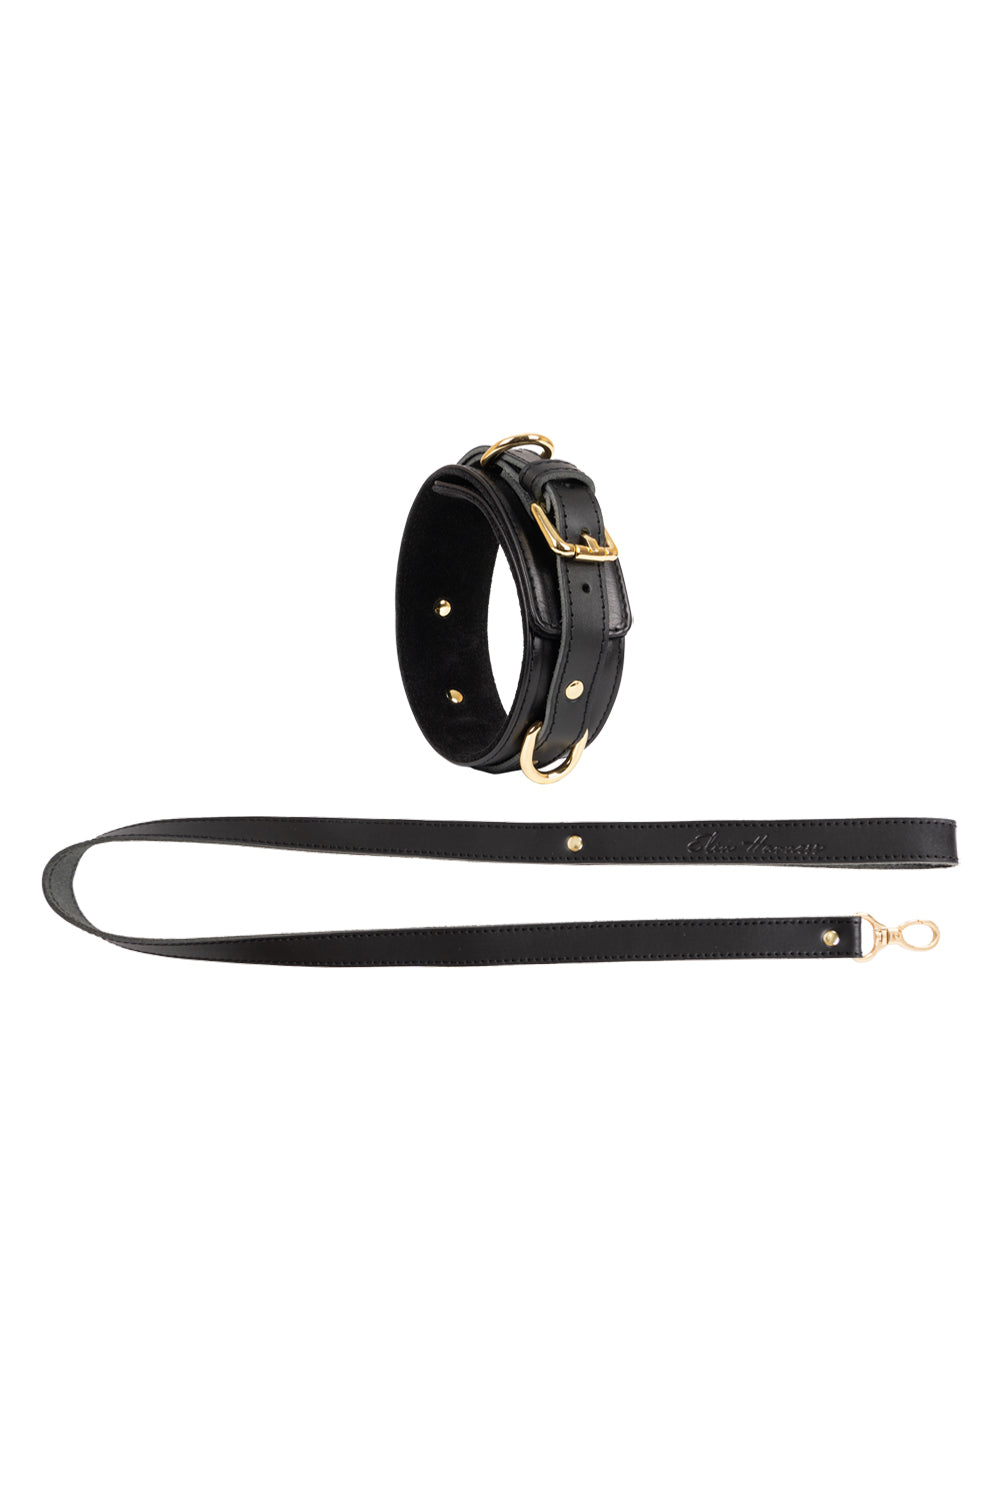 Leather Choker with Leash. 10 colors